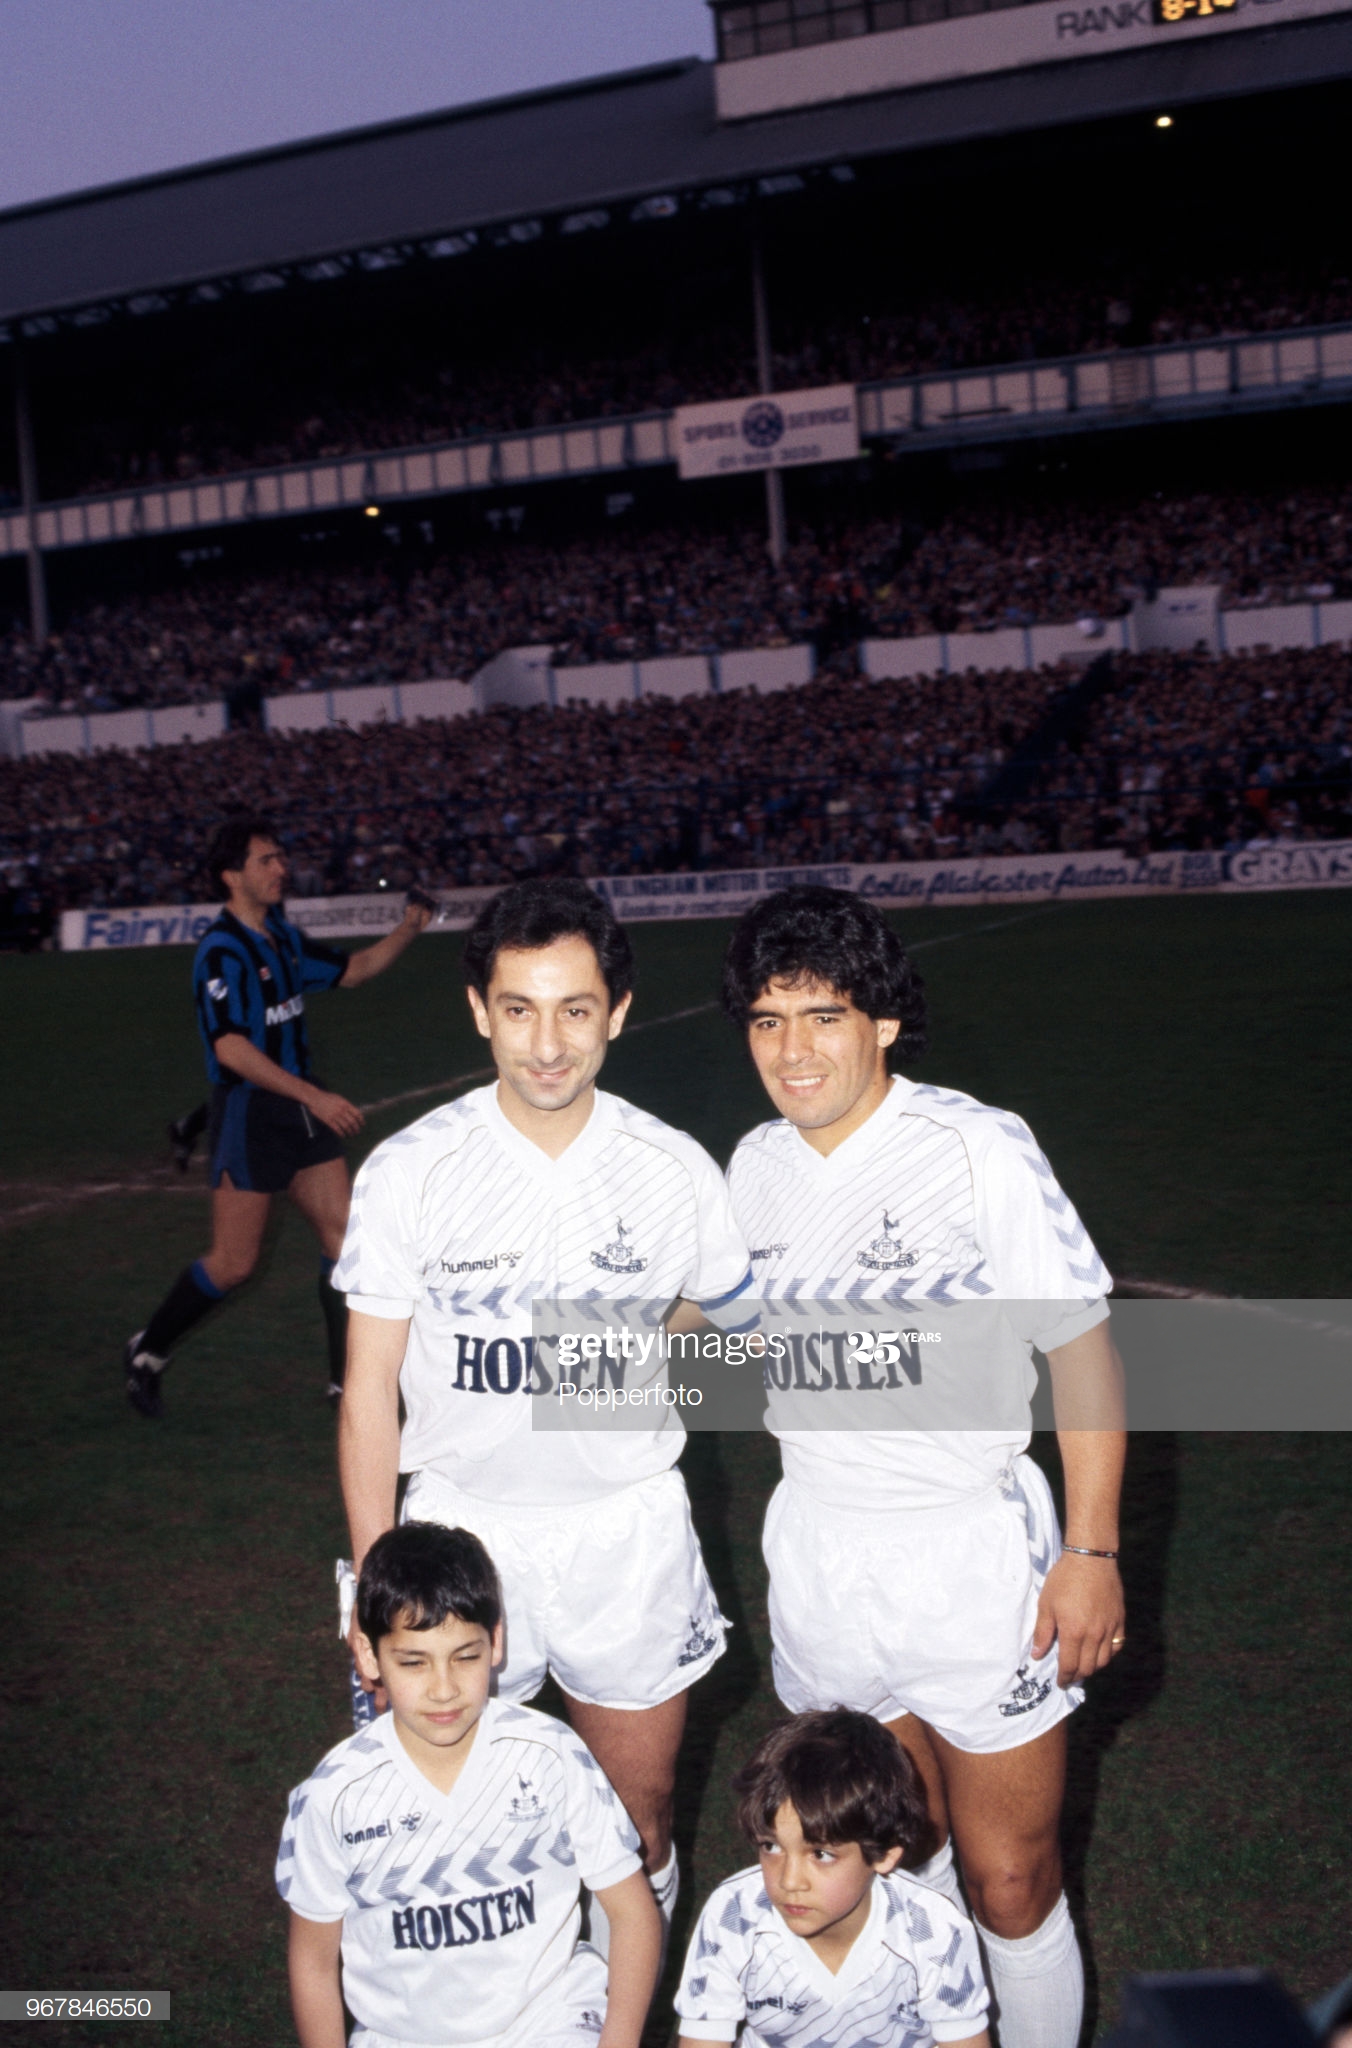 Classic Football Shirts on X: Tottenham Hotspur 1985 Home by Hummel ⚪  Amazing 80s Hummel design worn during Ossie Ardiles' testimonial in 1986.  Diego Maradona even got a run-out in it! Hitting